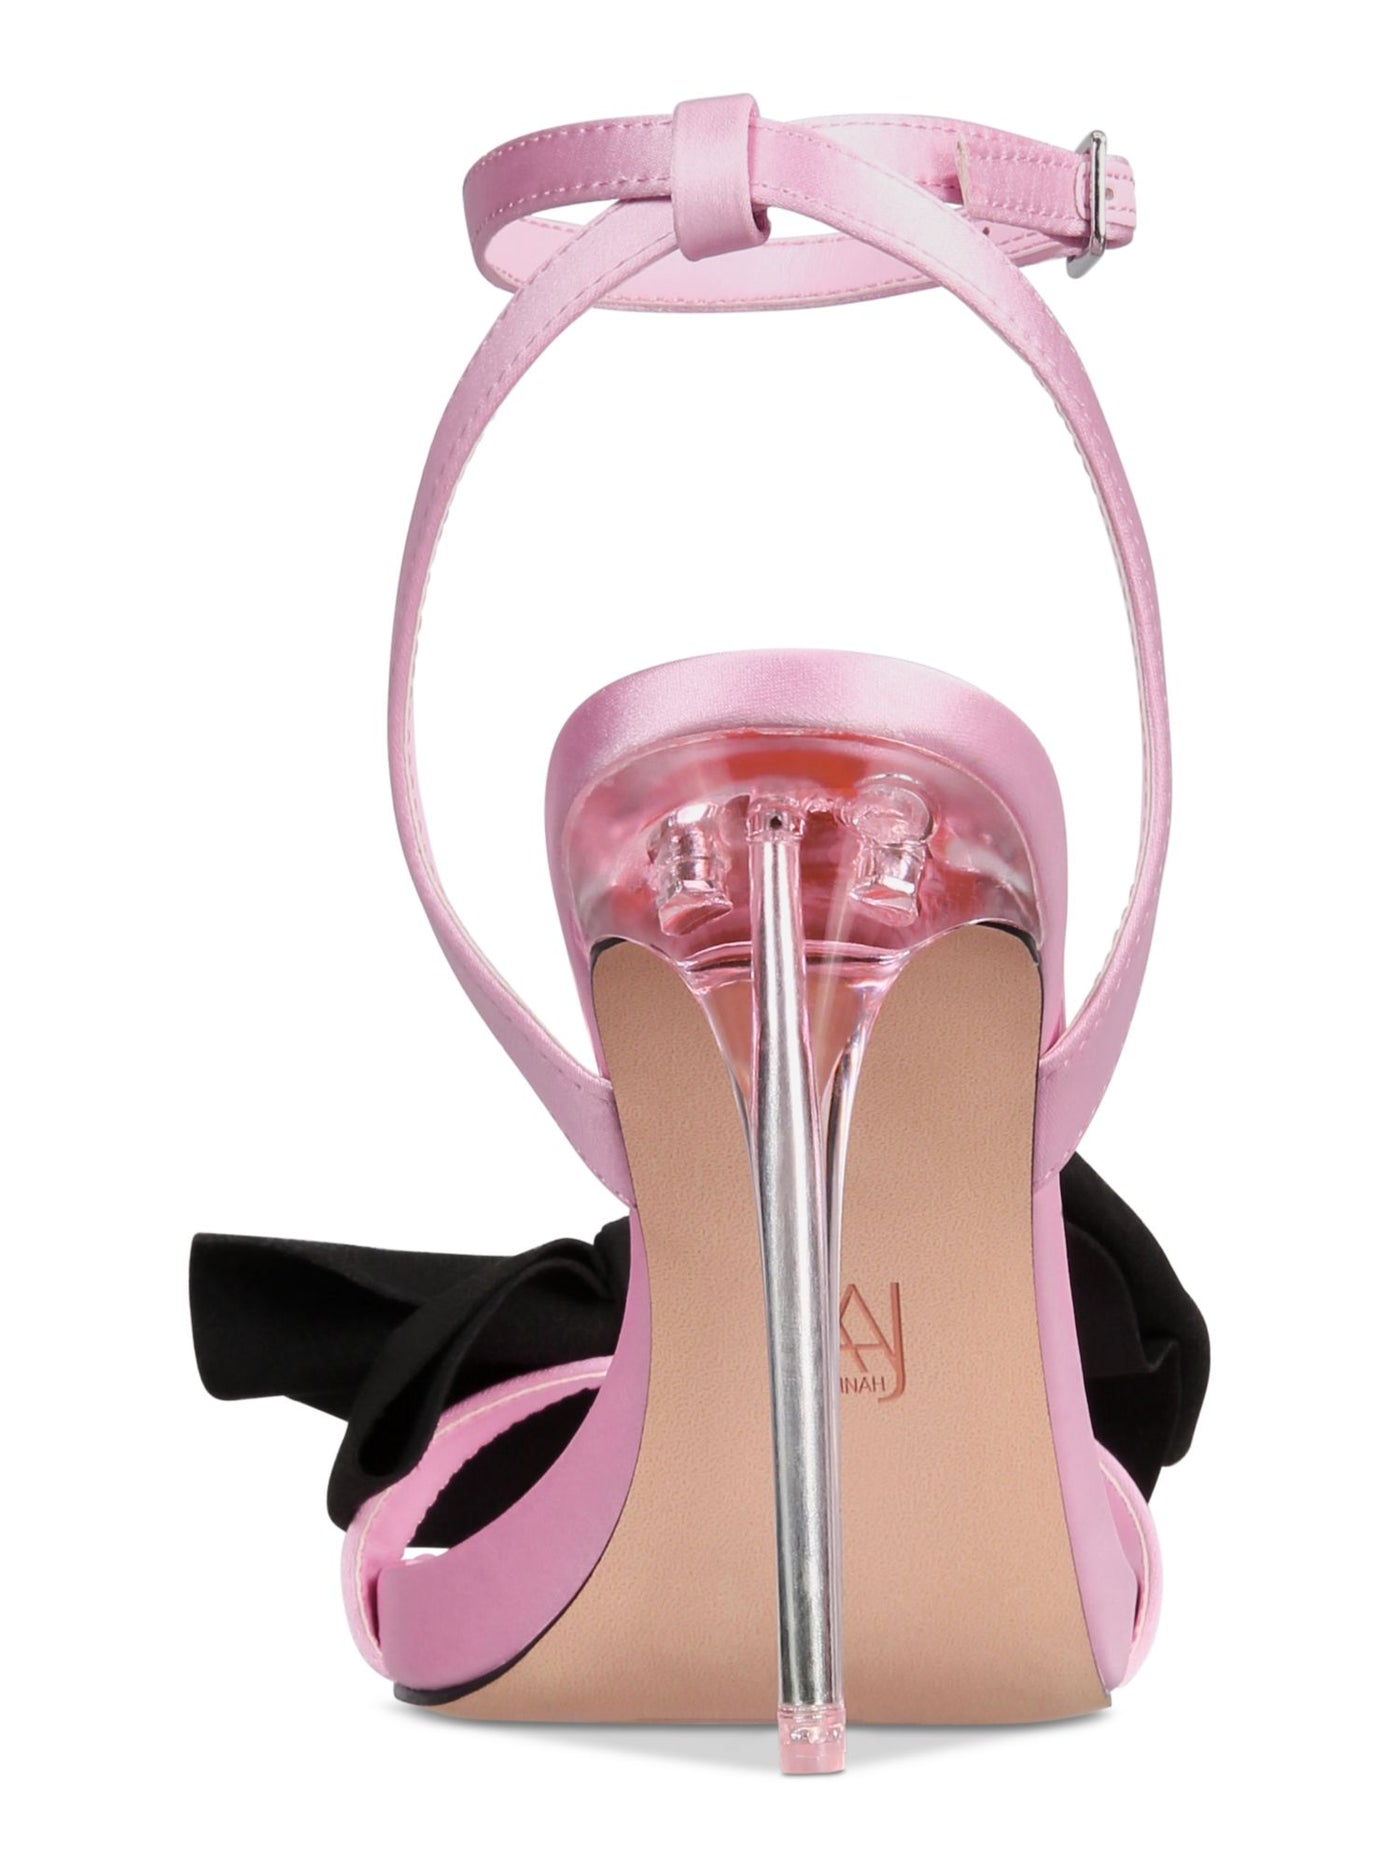 AAJ BY AMINAH Womens Pink Cushioned Bow Accent Ankle Strap Yahira Almond Toe Stiletto Buckle Dress Heeled Sandal 7.5 M